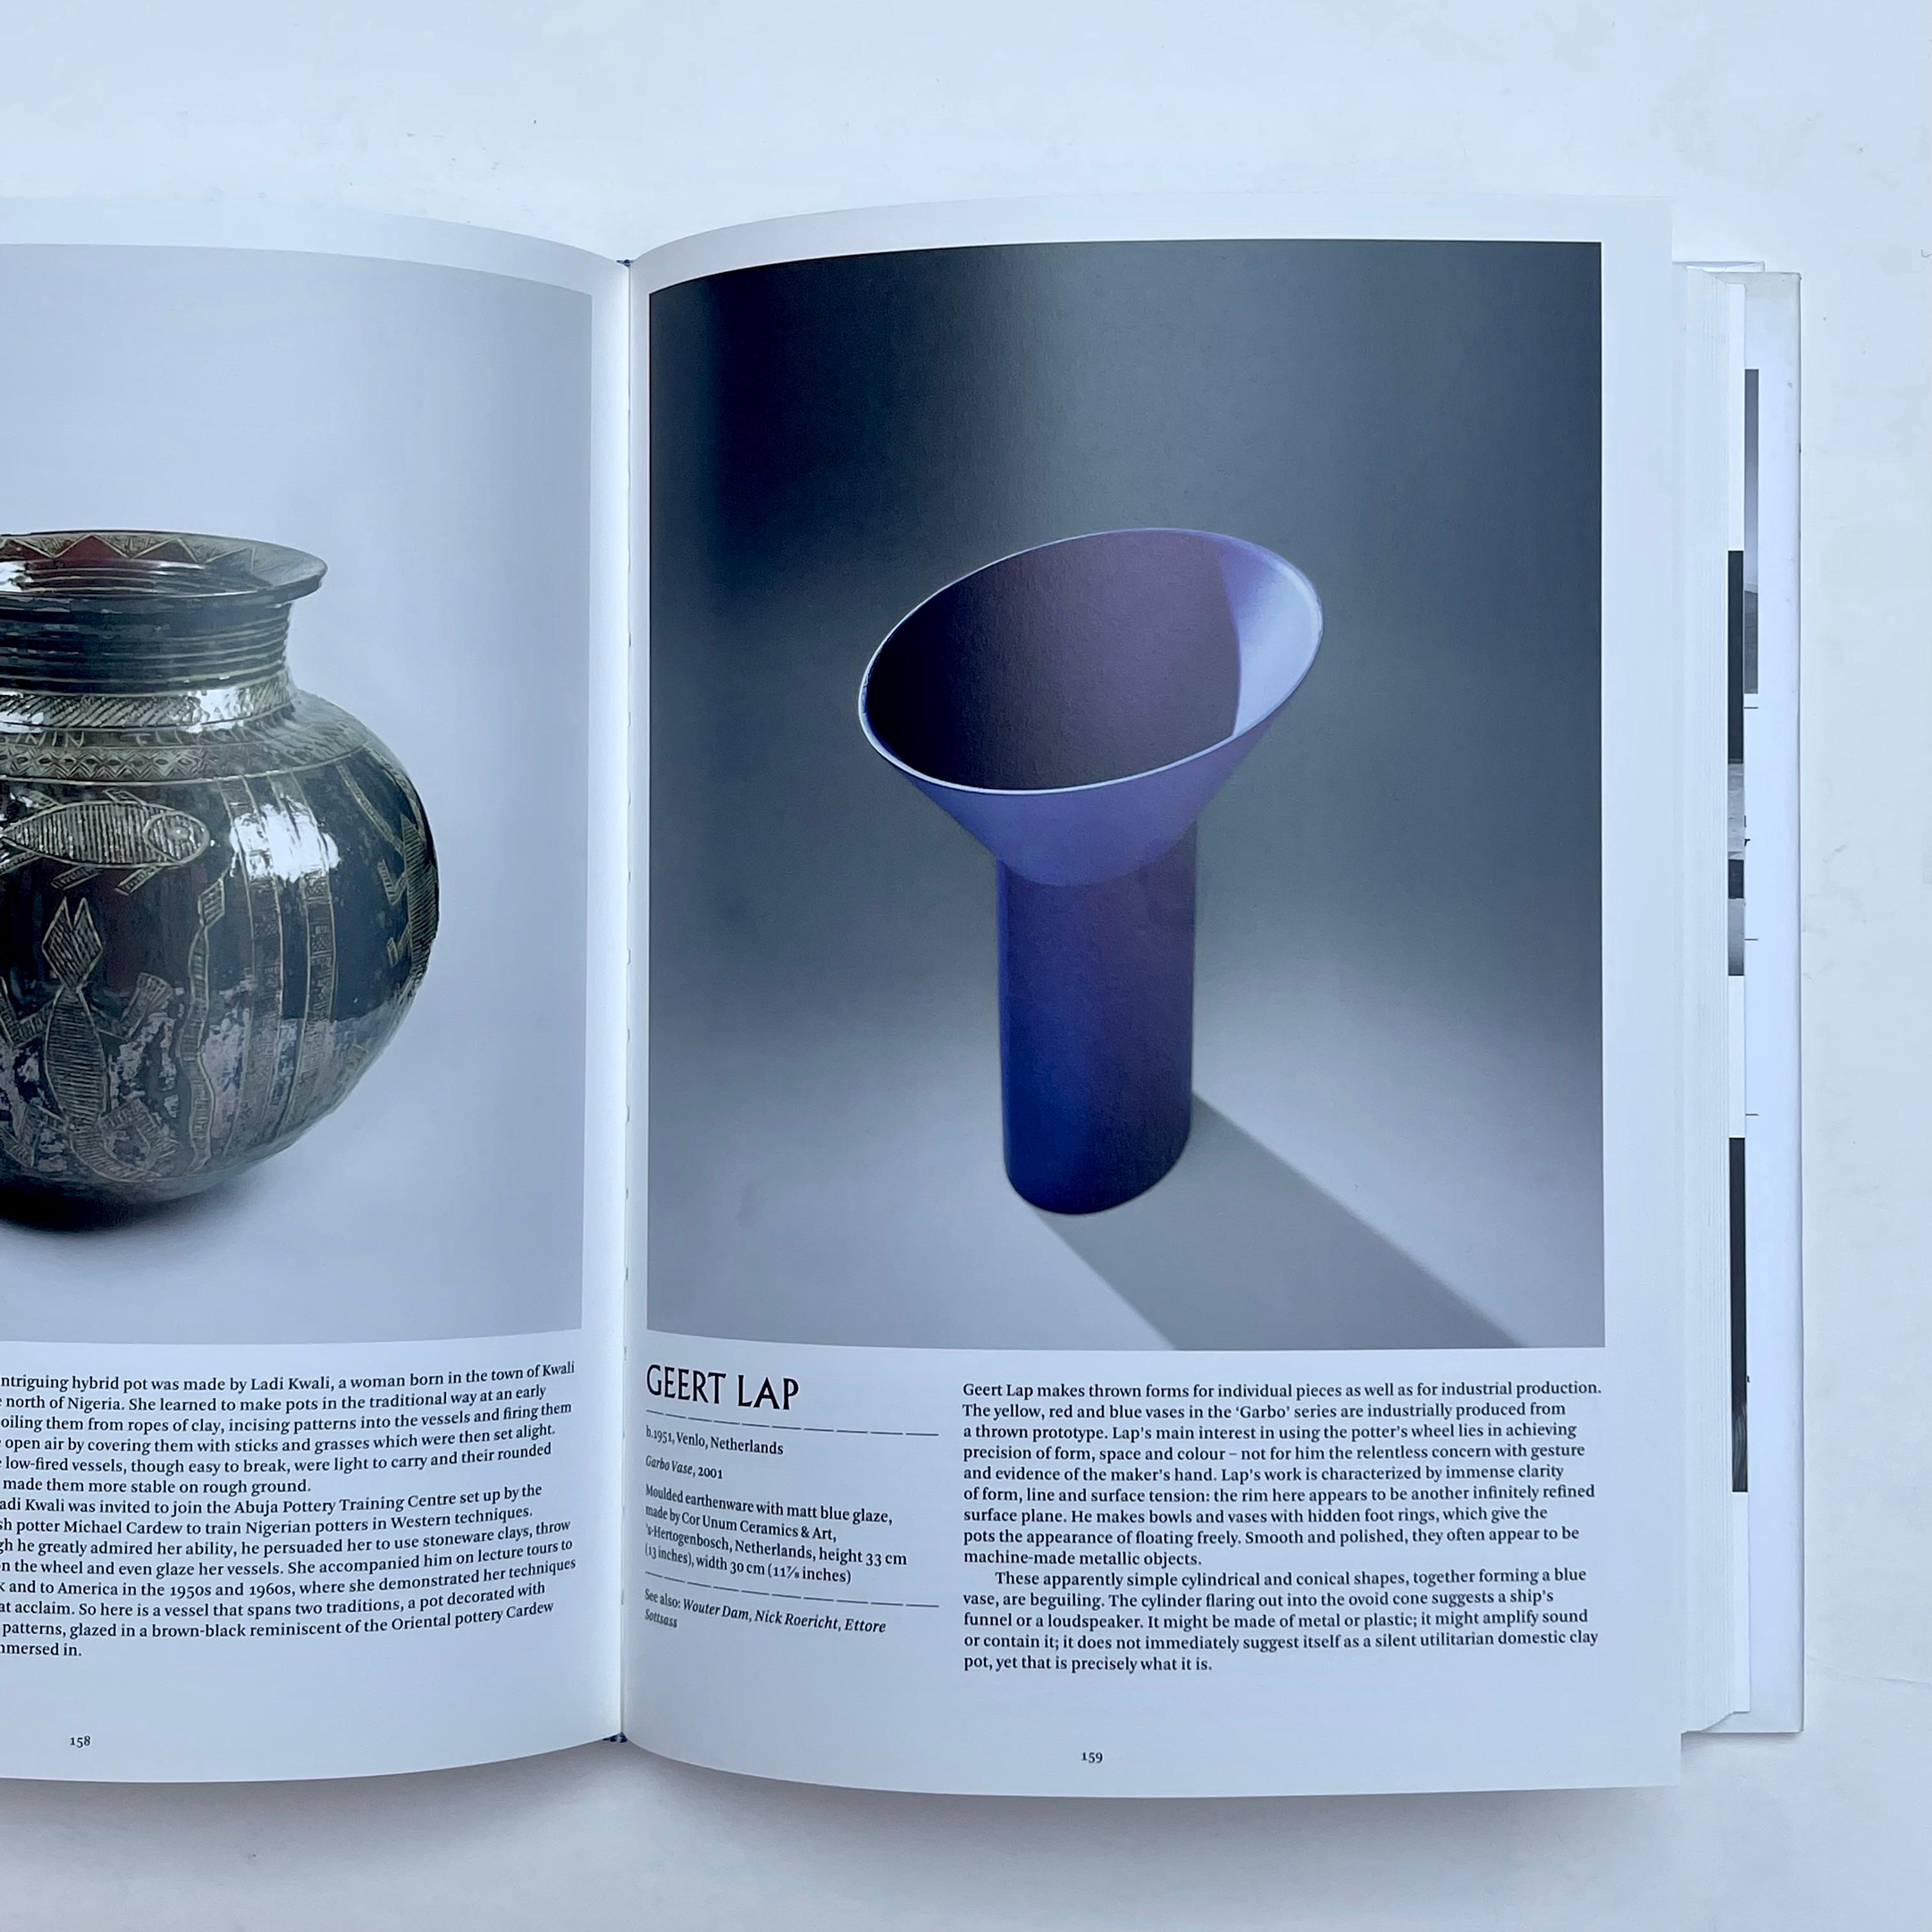 Edmund de Waal 
The Pot Book
Published by Phaidon Press, London 2011. Hardback first edition in dust jacket.
'The history of ceramic art is ingrained in the history of mankind. Clay is one of the very first materials 'invented' by man. An